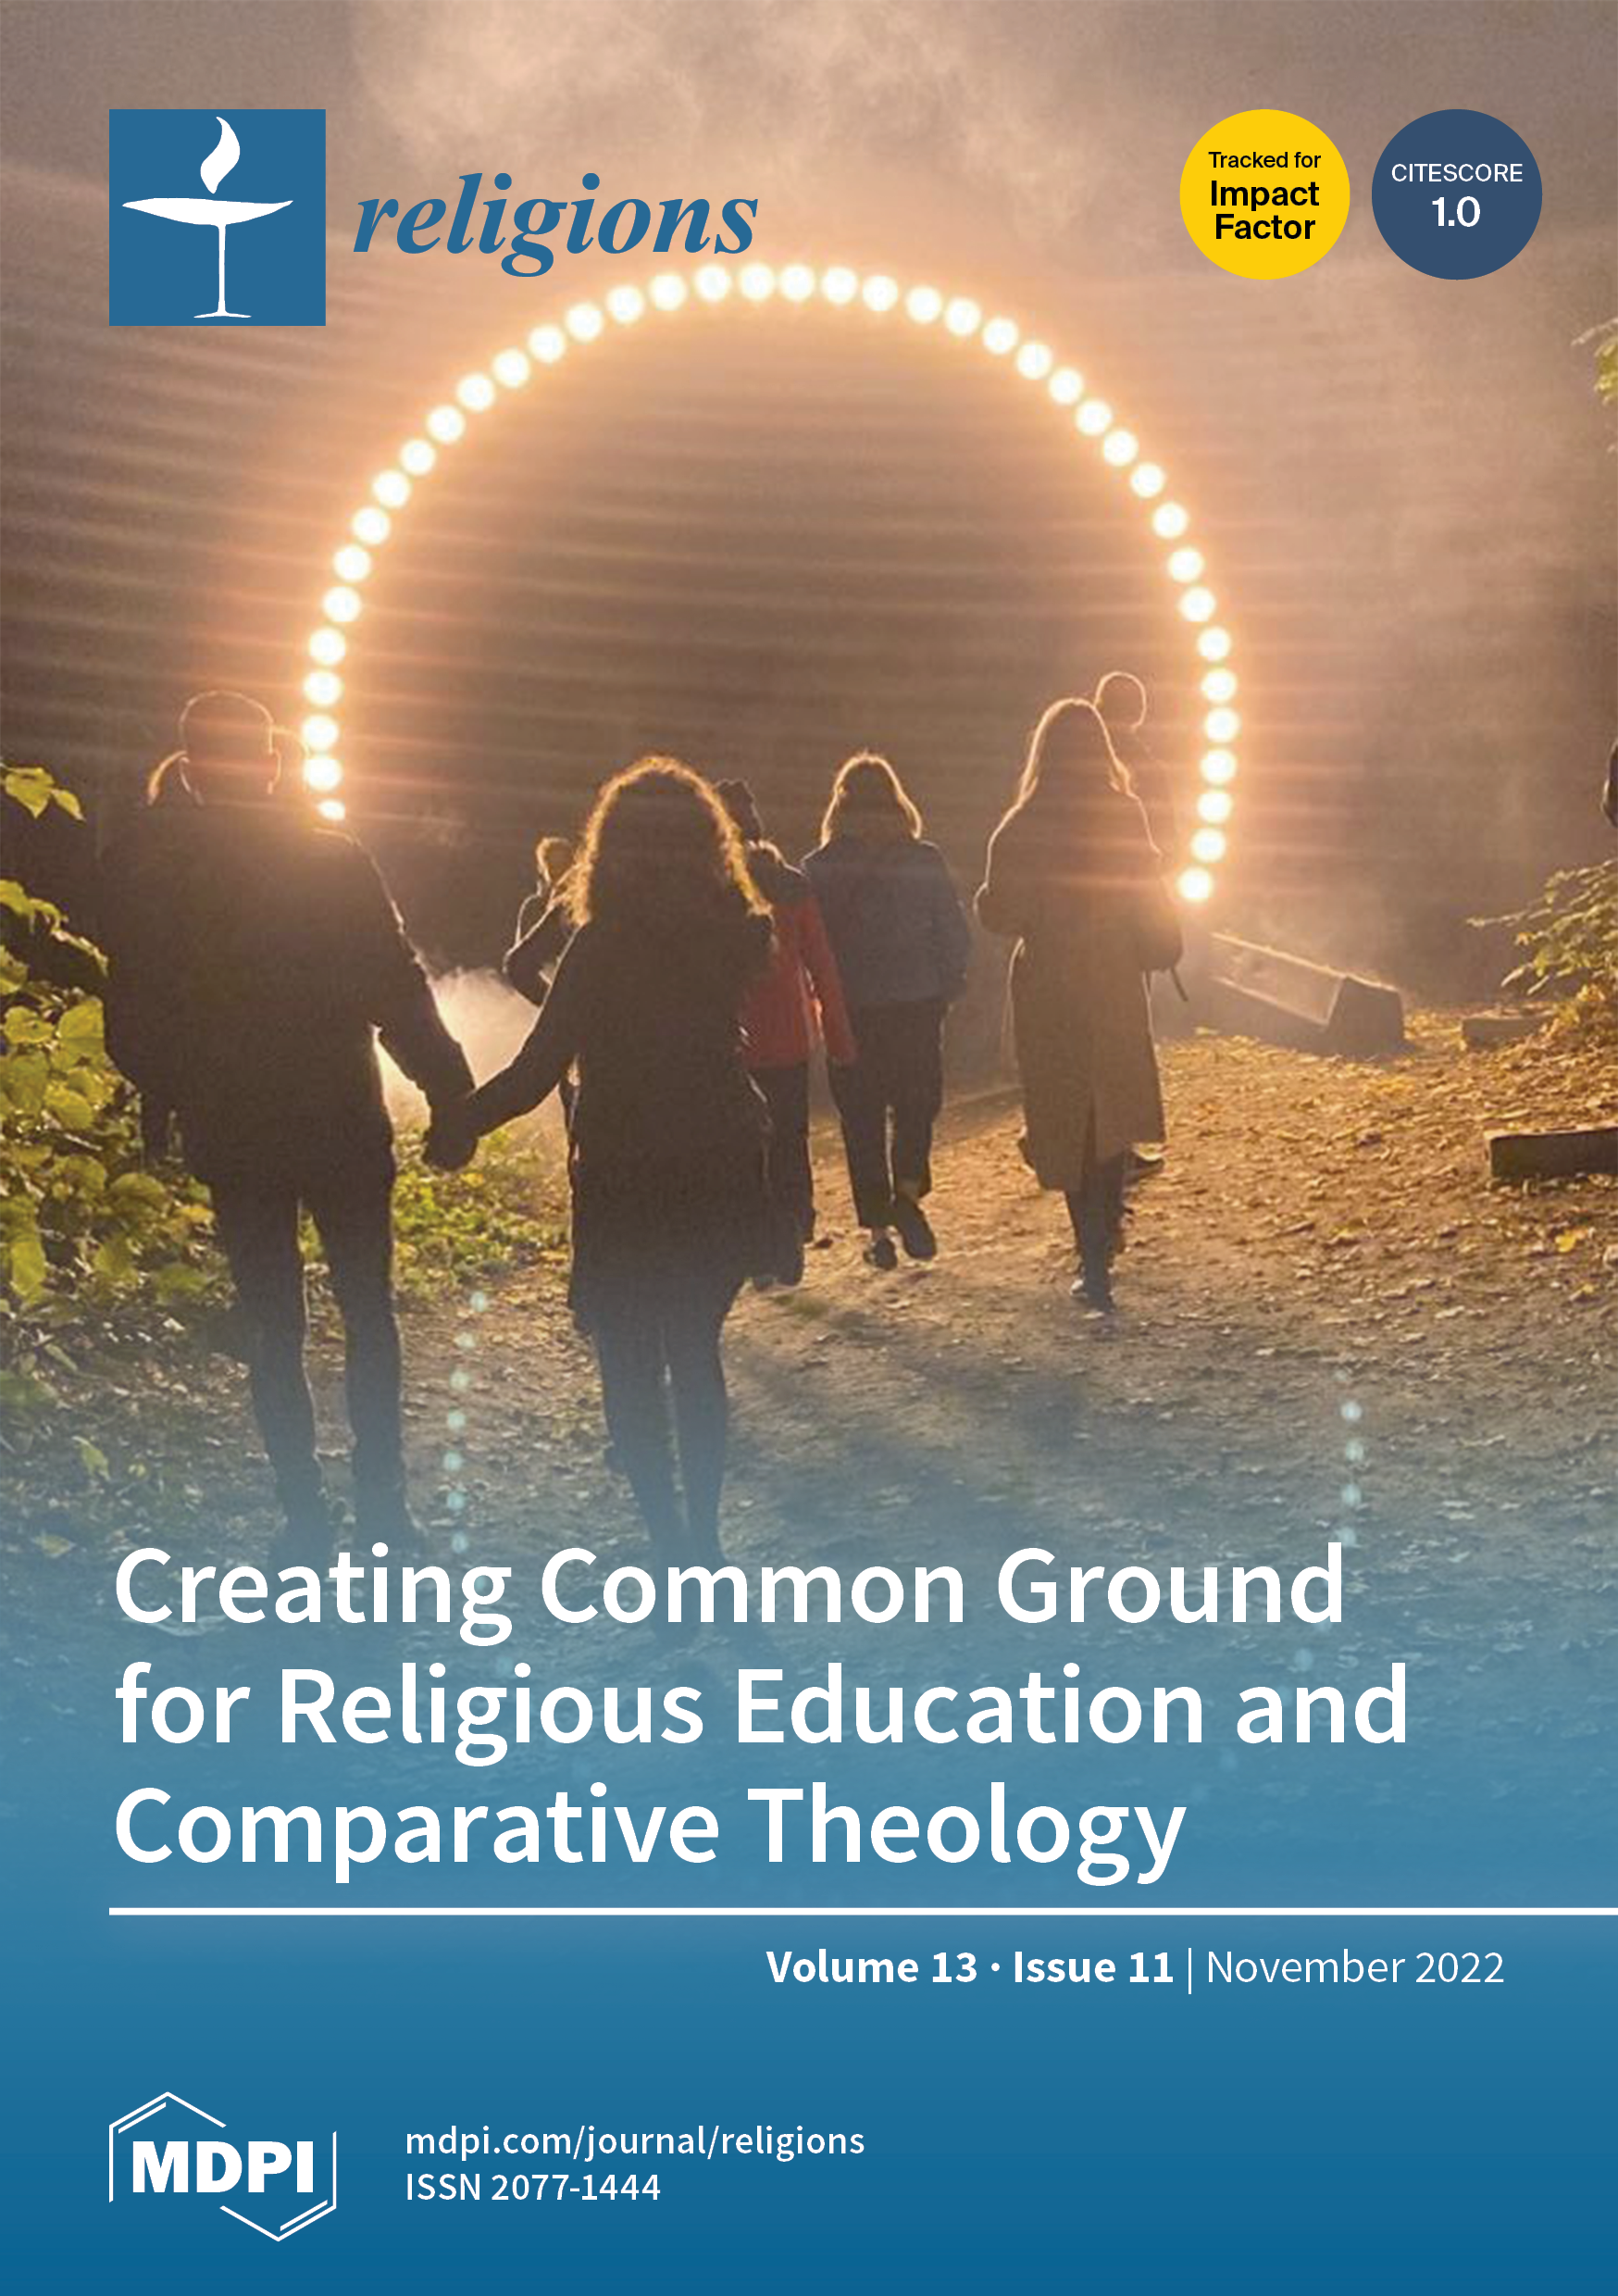 Religious Education and Comparative Theology